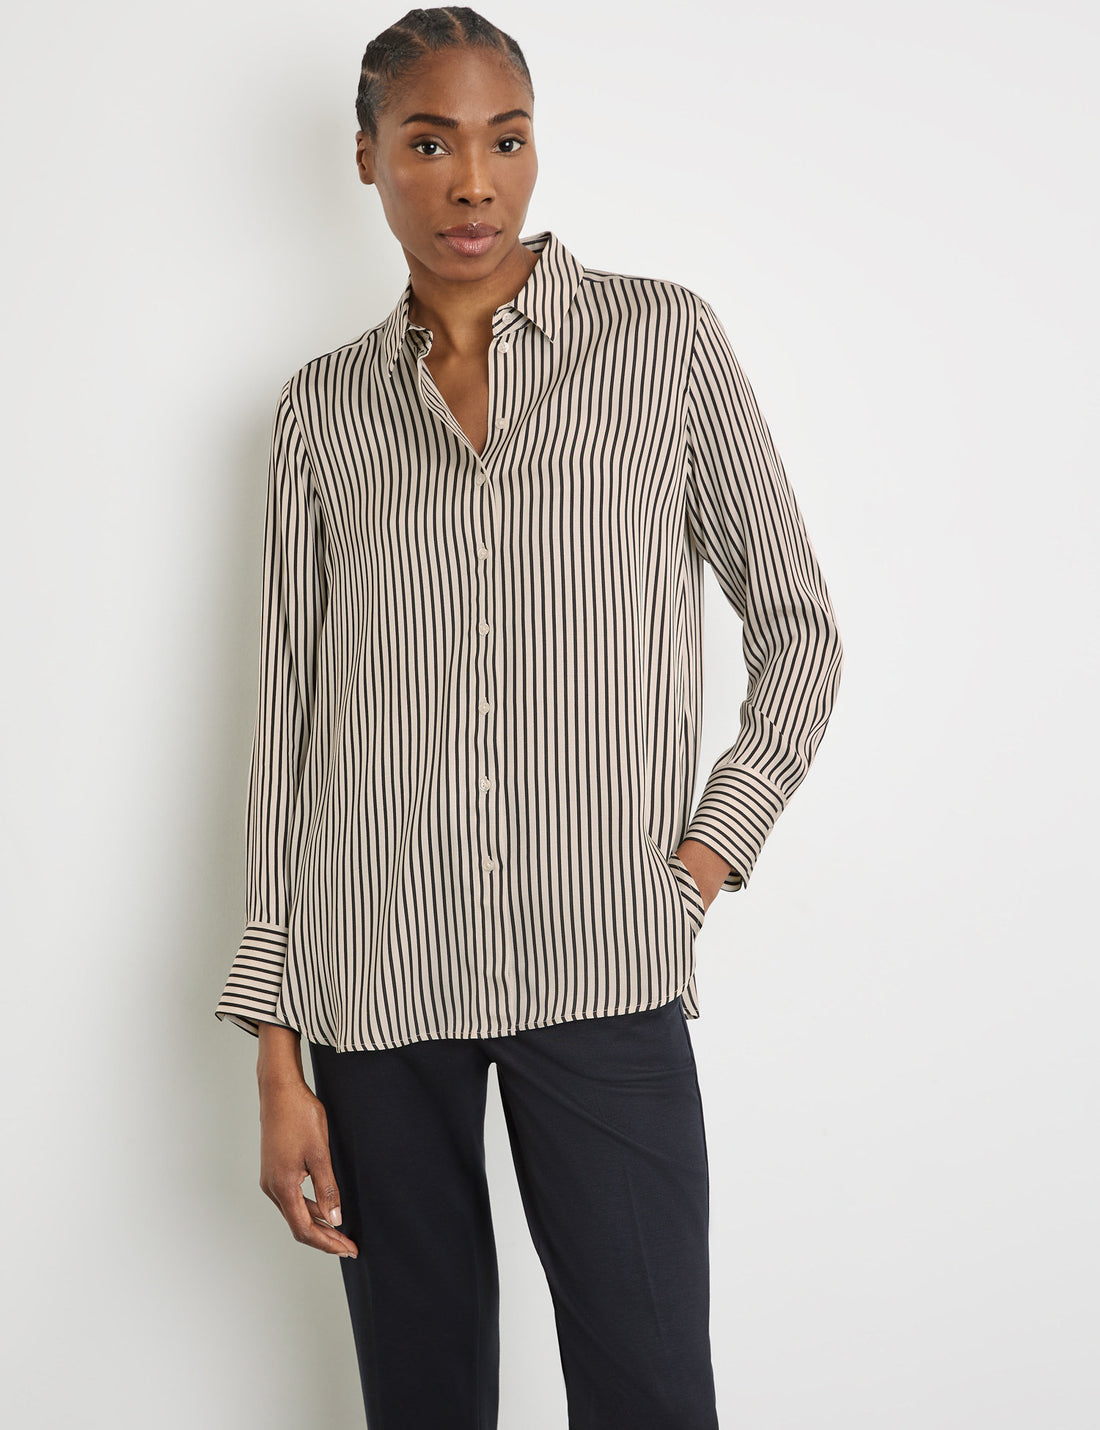 Striped Shirt Blouse With A Rounded Hem_360004-31401_9016_01